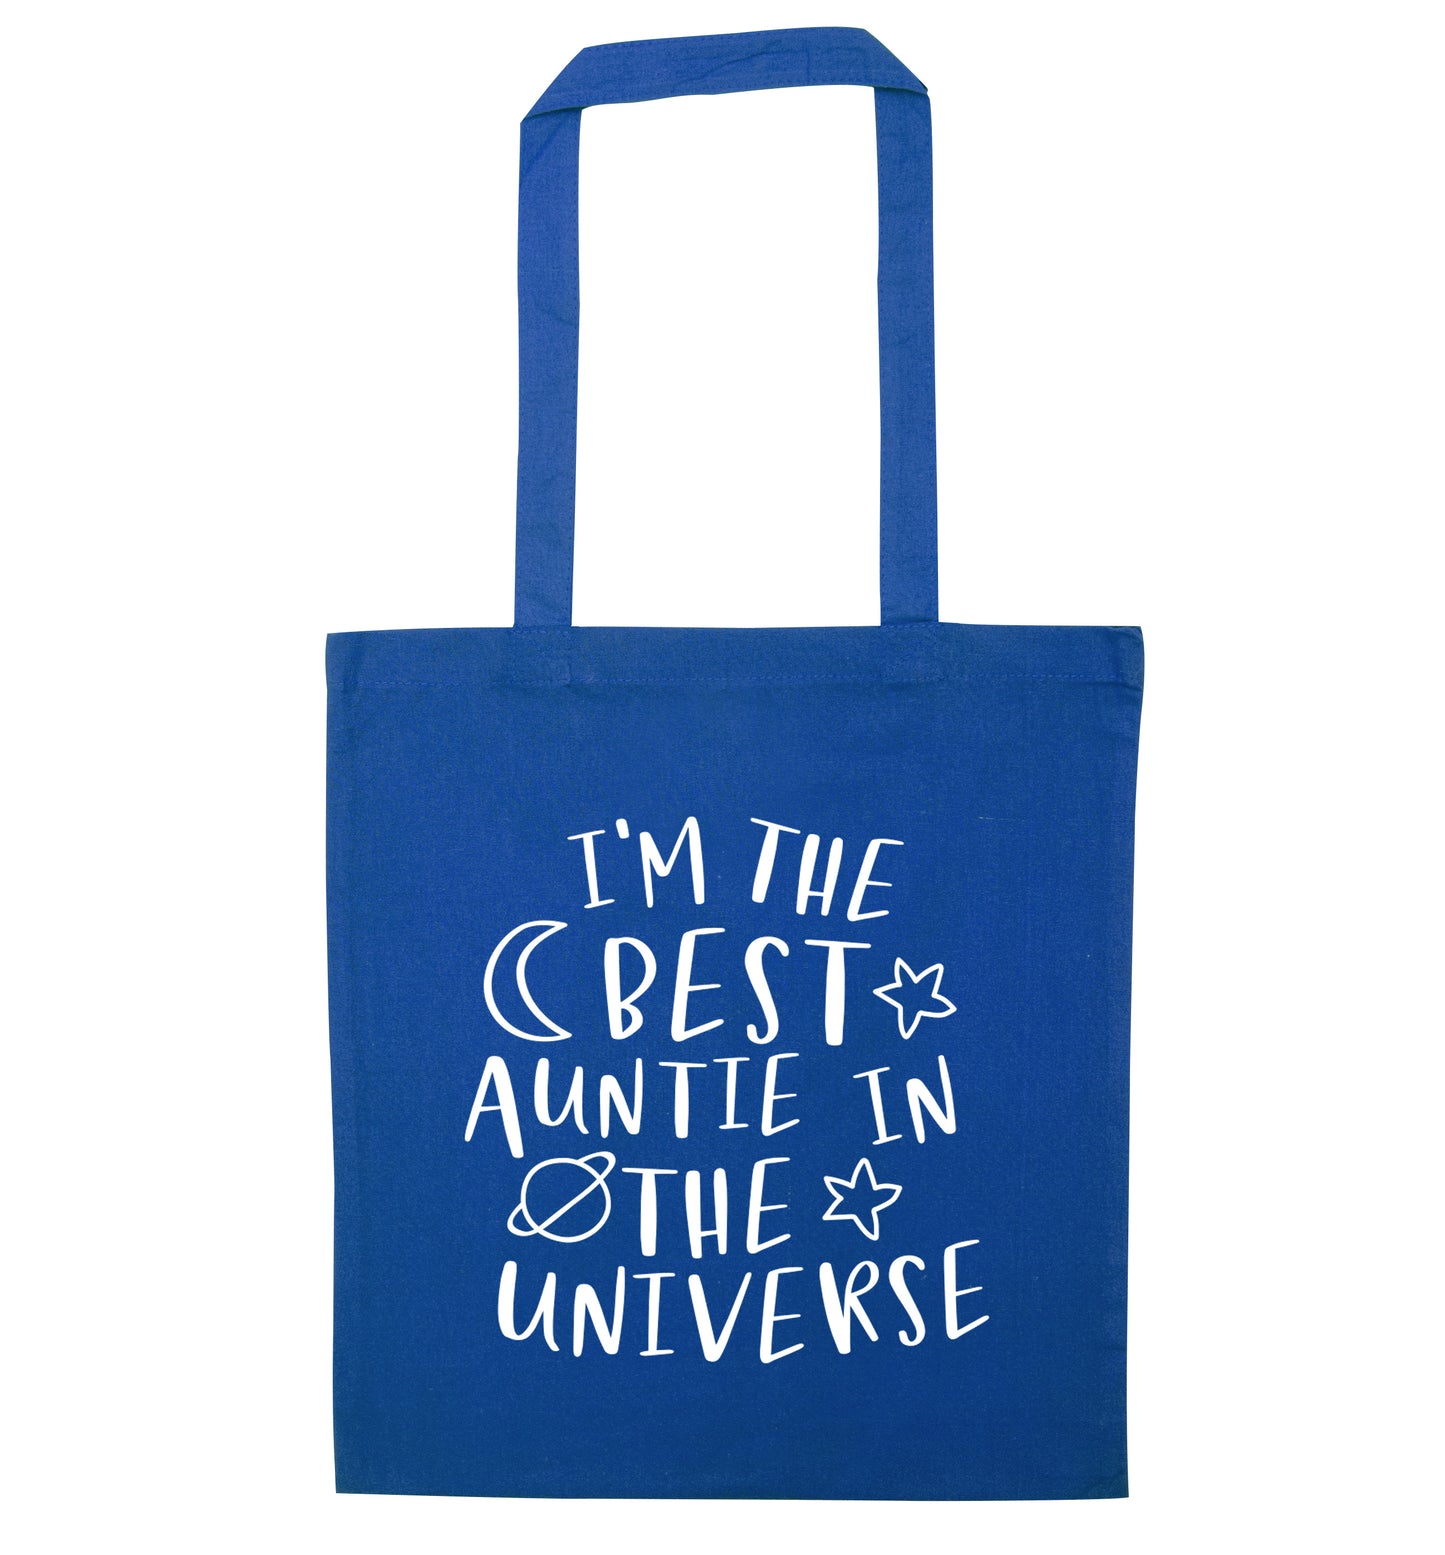 I'm the best auntie in the universe blue tote bag